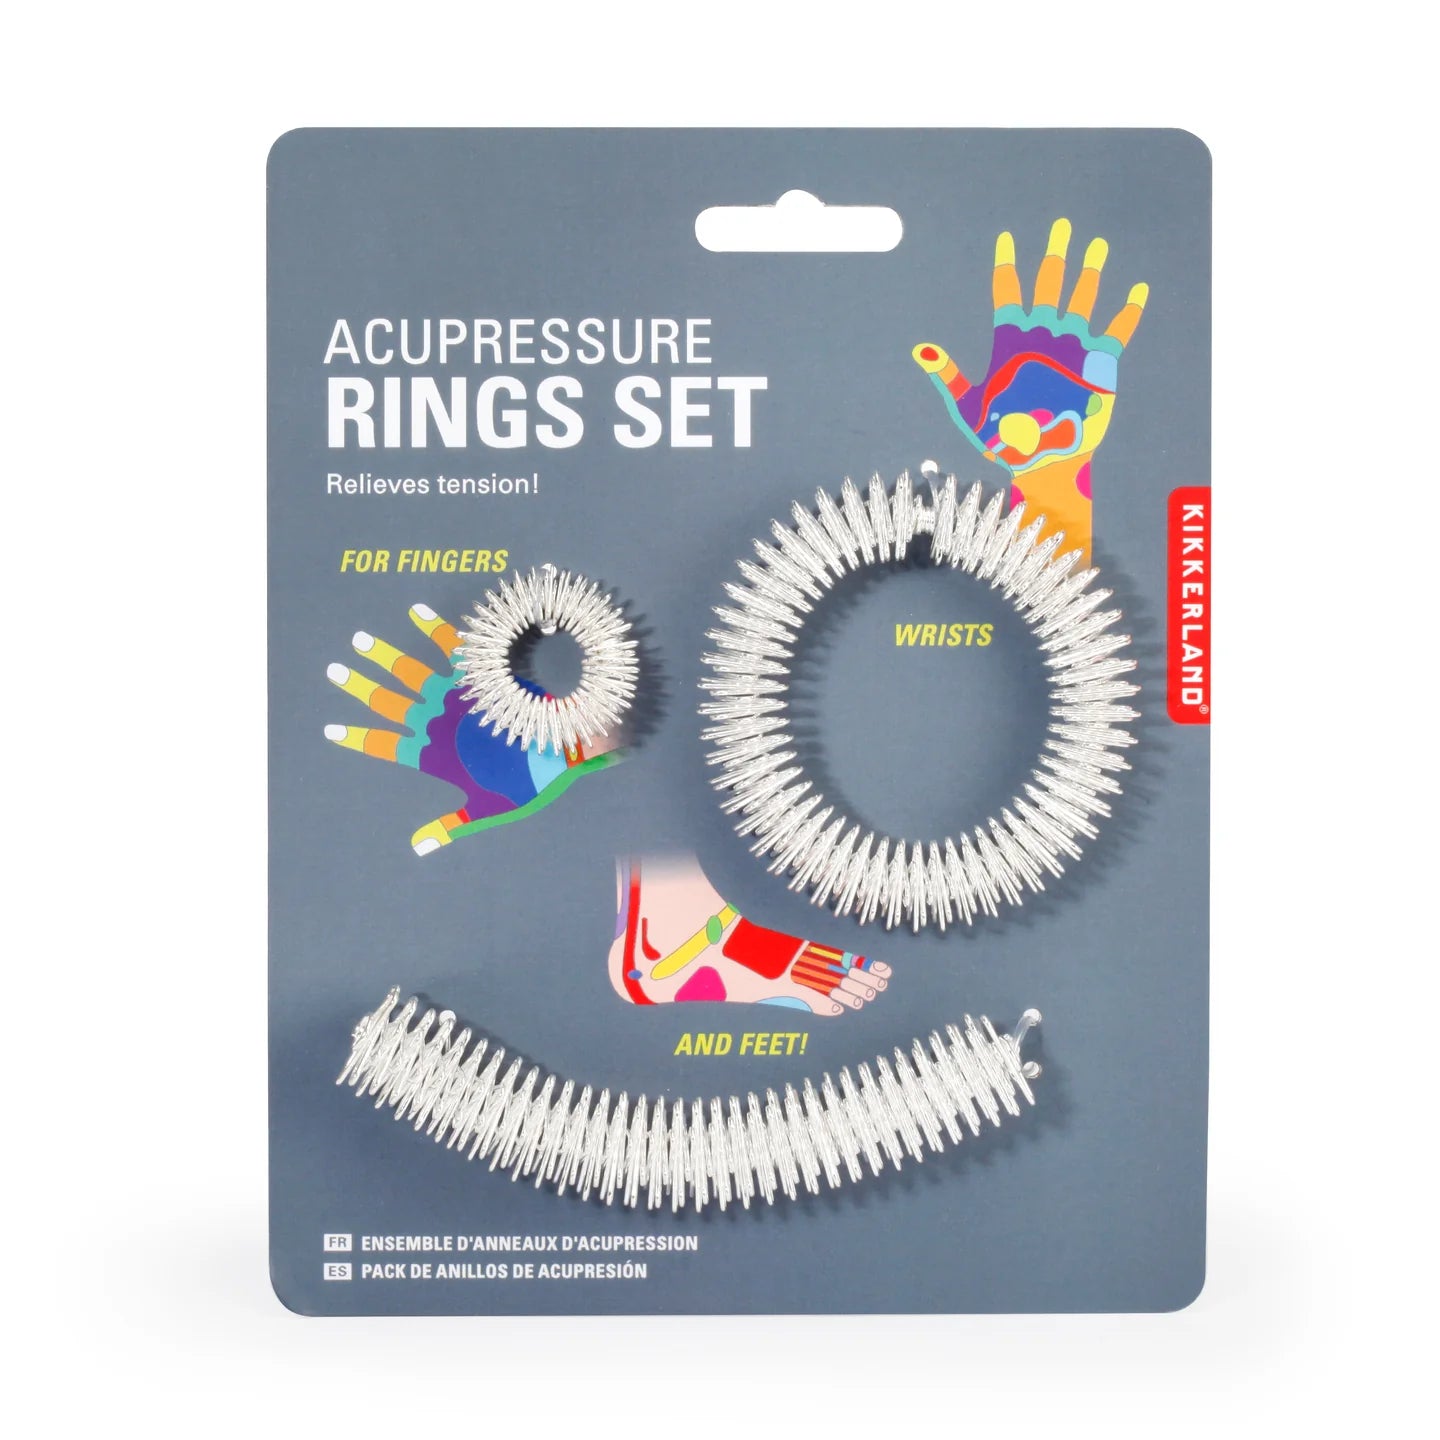 Fab Gifts | Kikkerland Acupressure Ring Set by Weirs of Baggot Street